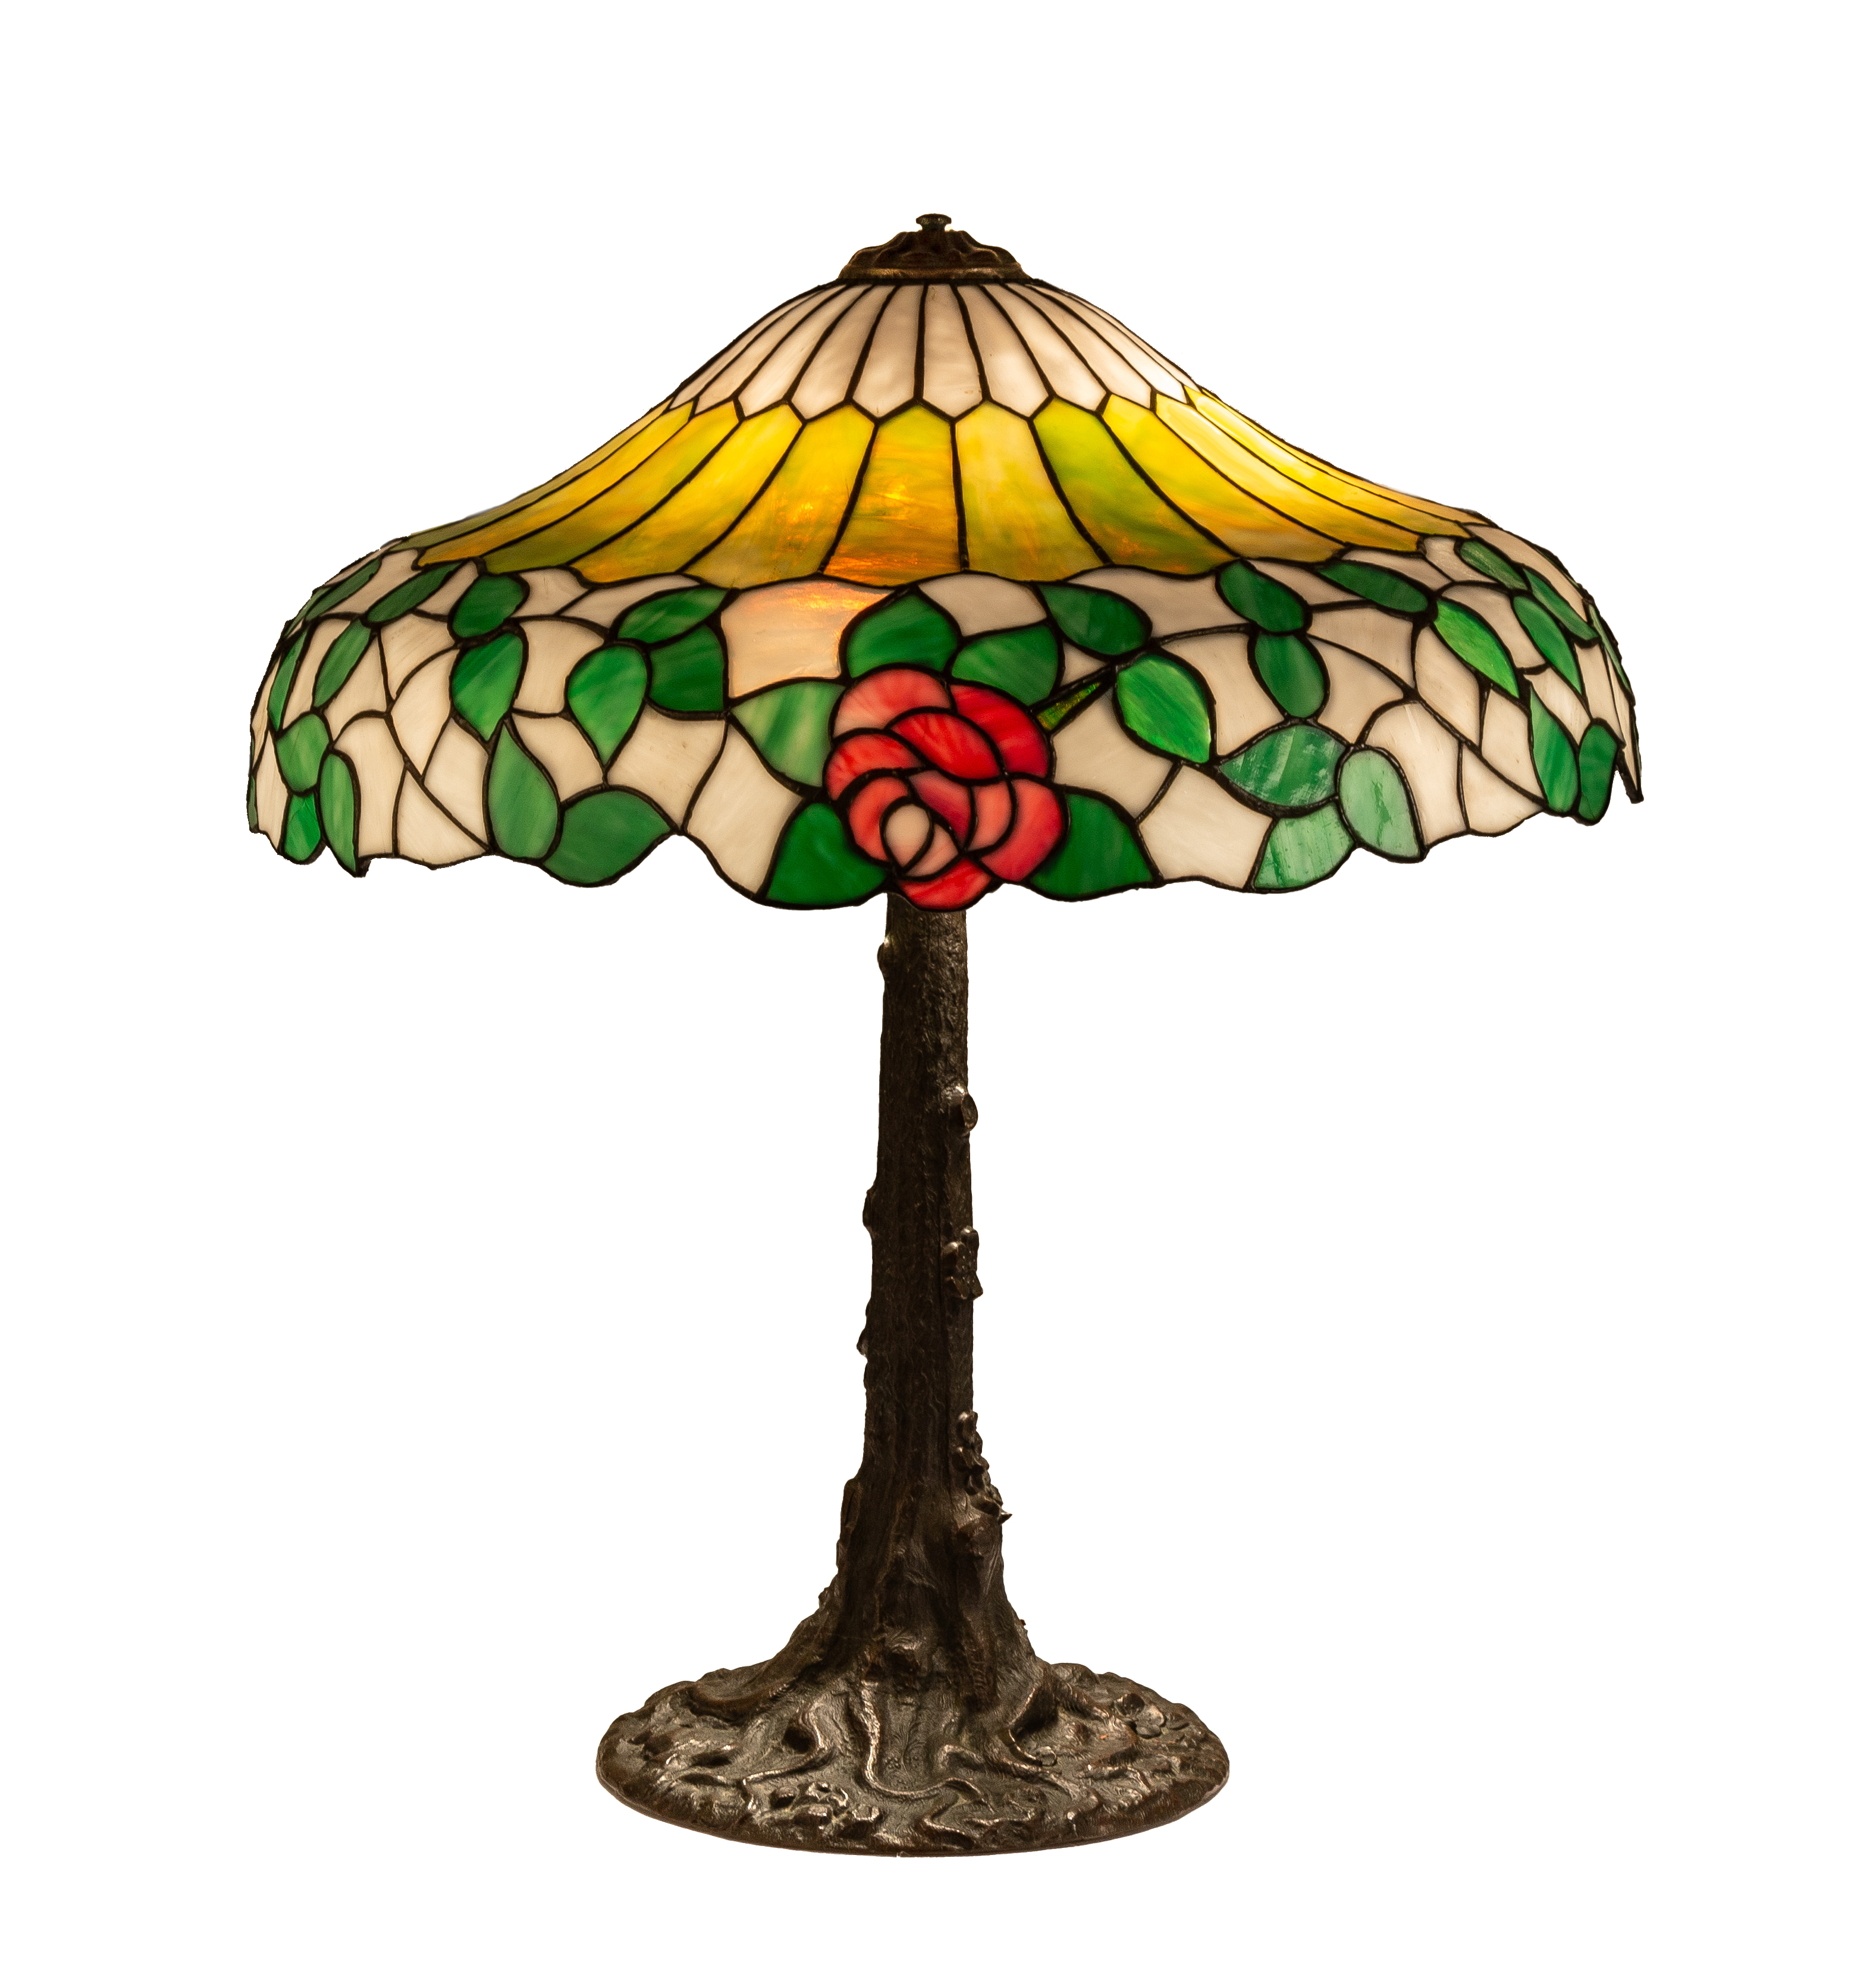 CHICAGO MOSAIC LEADED GLASS ROSE